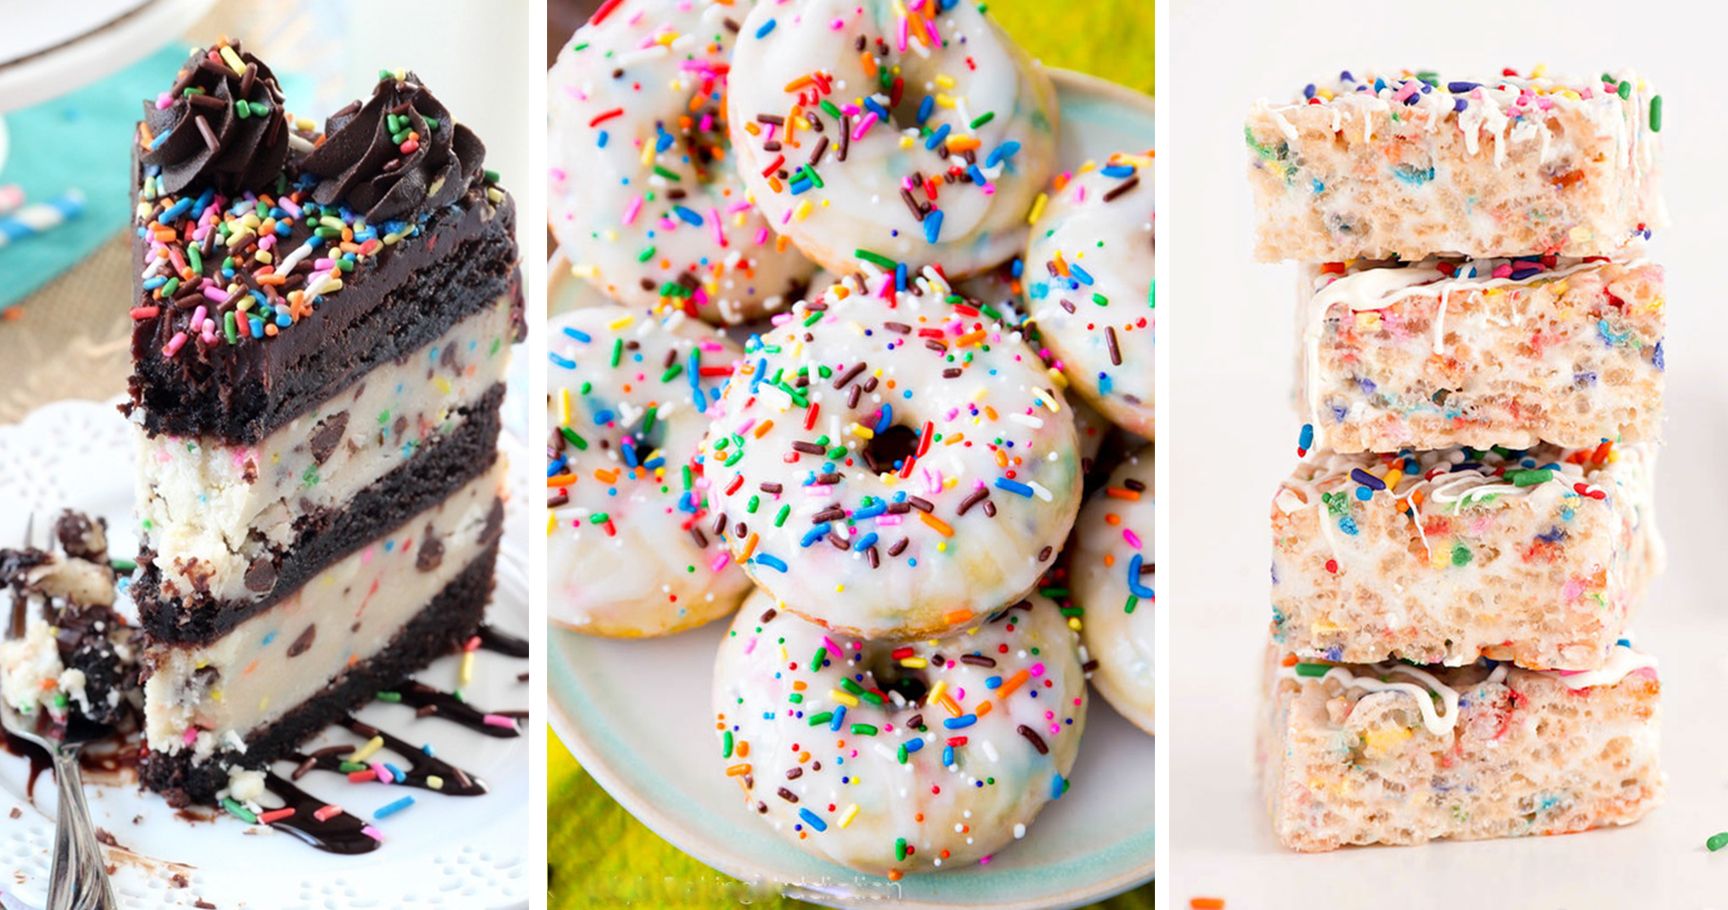 15 Funfetti Dessert Recipes That The Kids (And You!) Can Enjoy